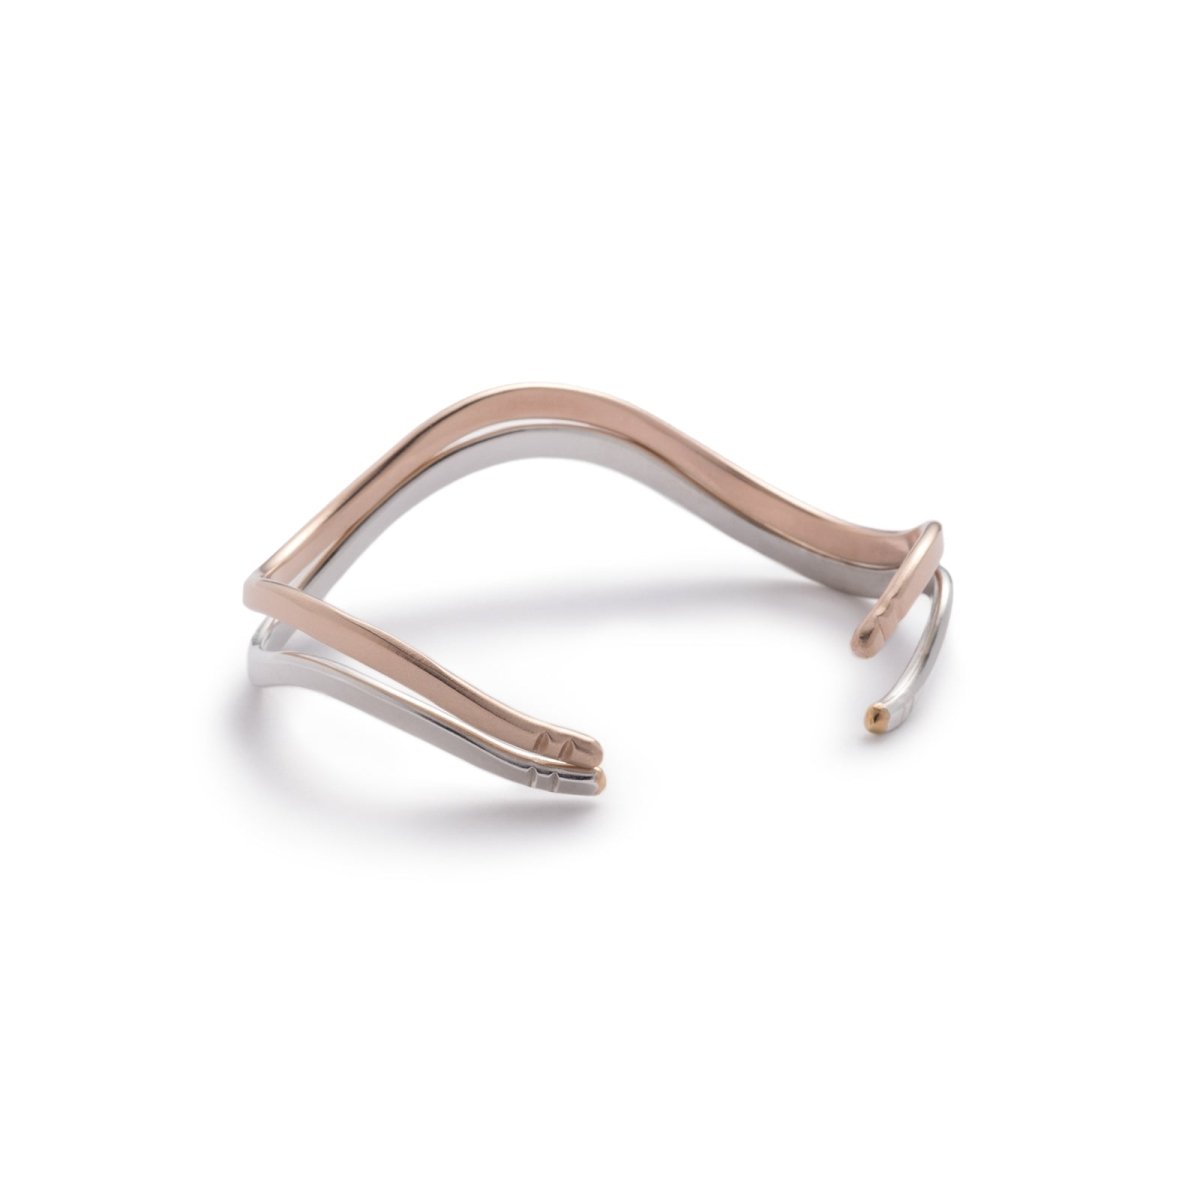 A stacking pair of bronze and sterling silver betsy & iya Fluit cuff bracelets. Hand-crafted in Portland, Oregon.